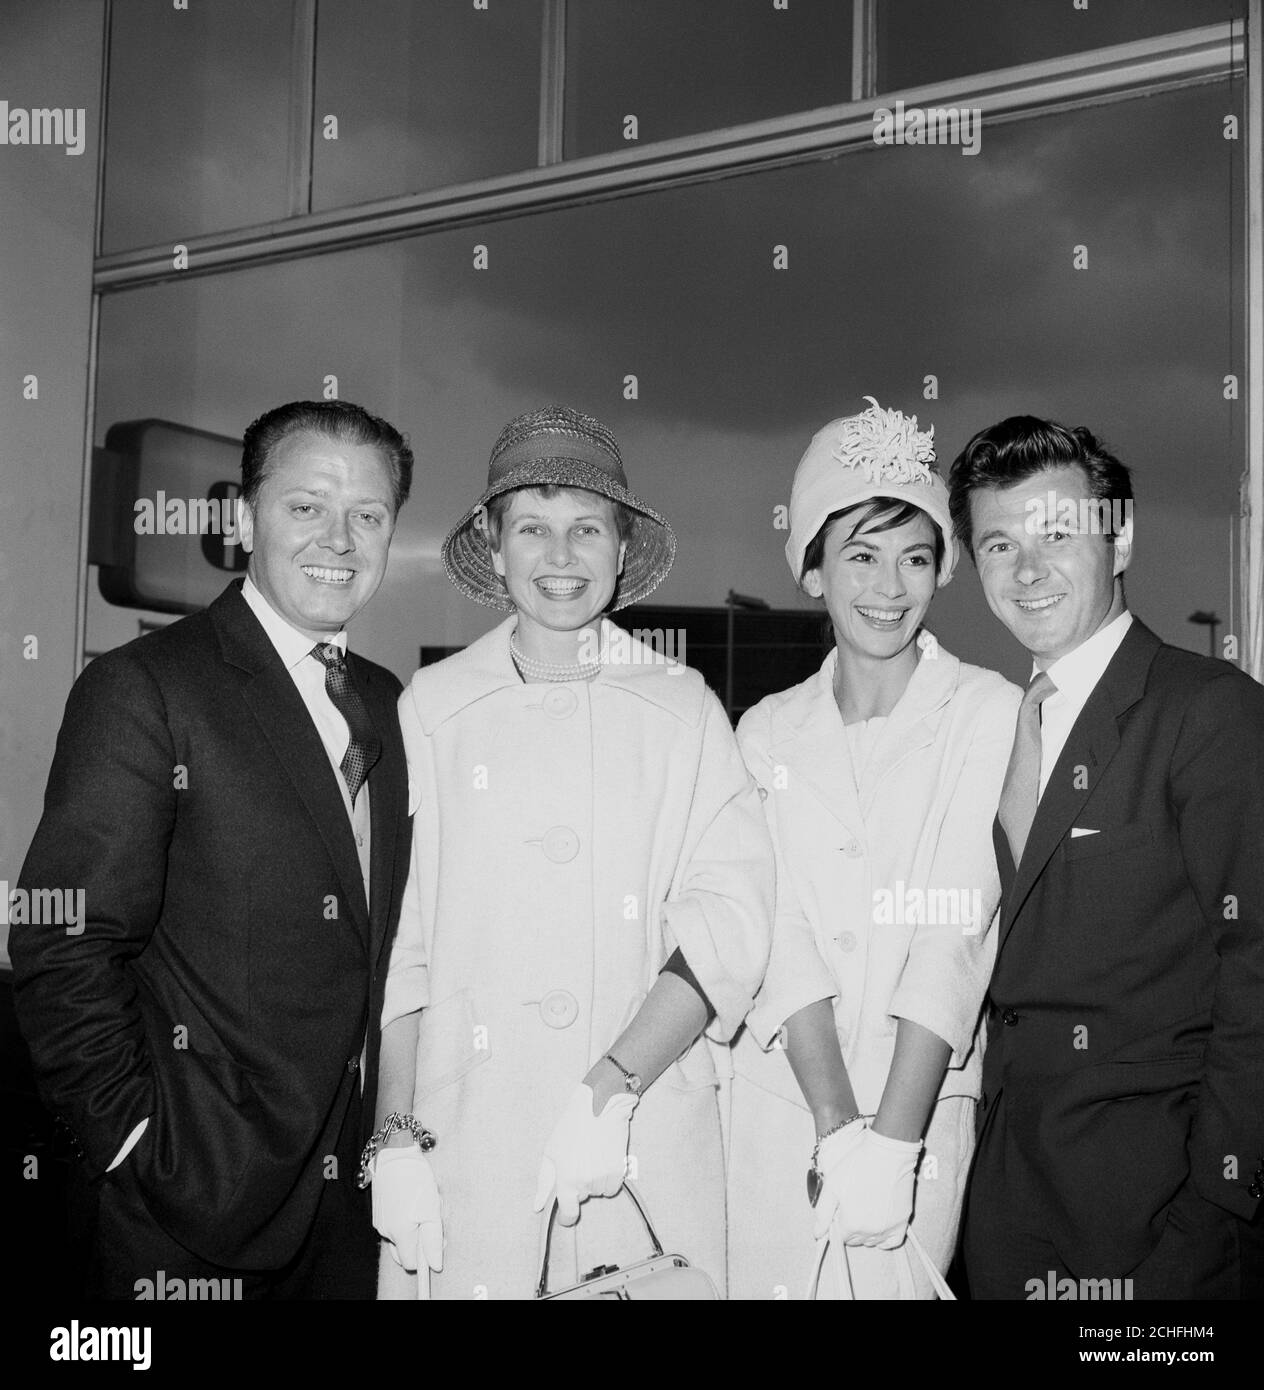 Home from the Berlin Film Festival with awards for their film 'The Angry Silence' are smiling actors Richard Attenborough (far left) and Bryan Forbes. Pictured with their wives, Mrs. Attenborough (Sheila Sim, left) and Mrs. Forbes (Nanette Newman). 6/7/1960 Stock Photo